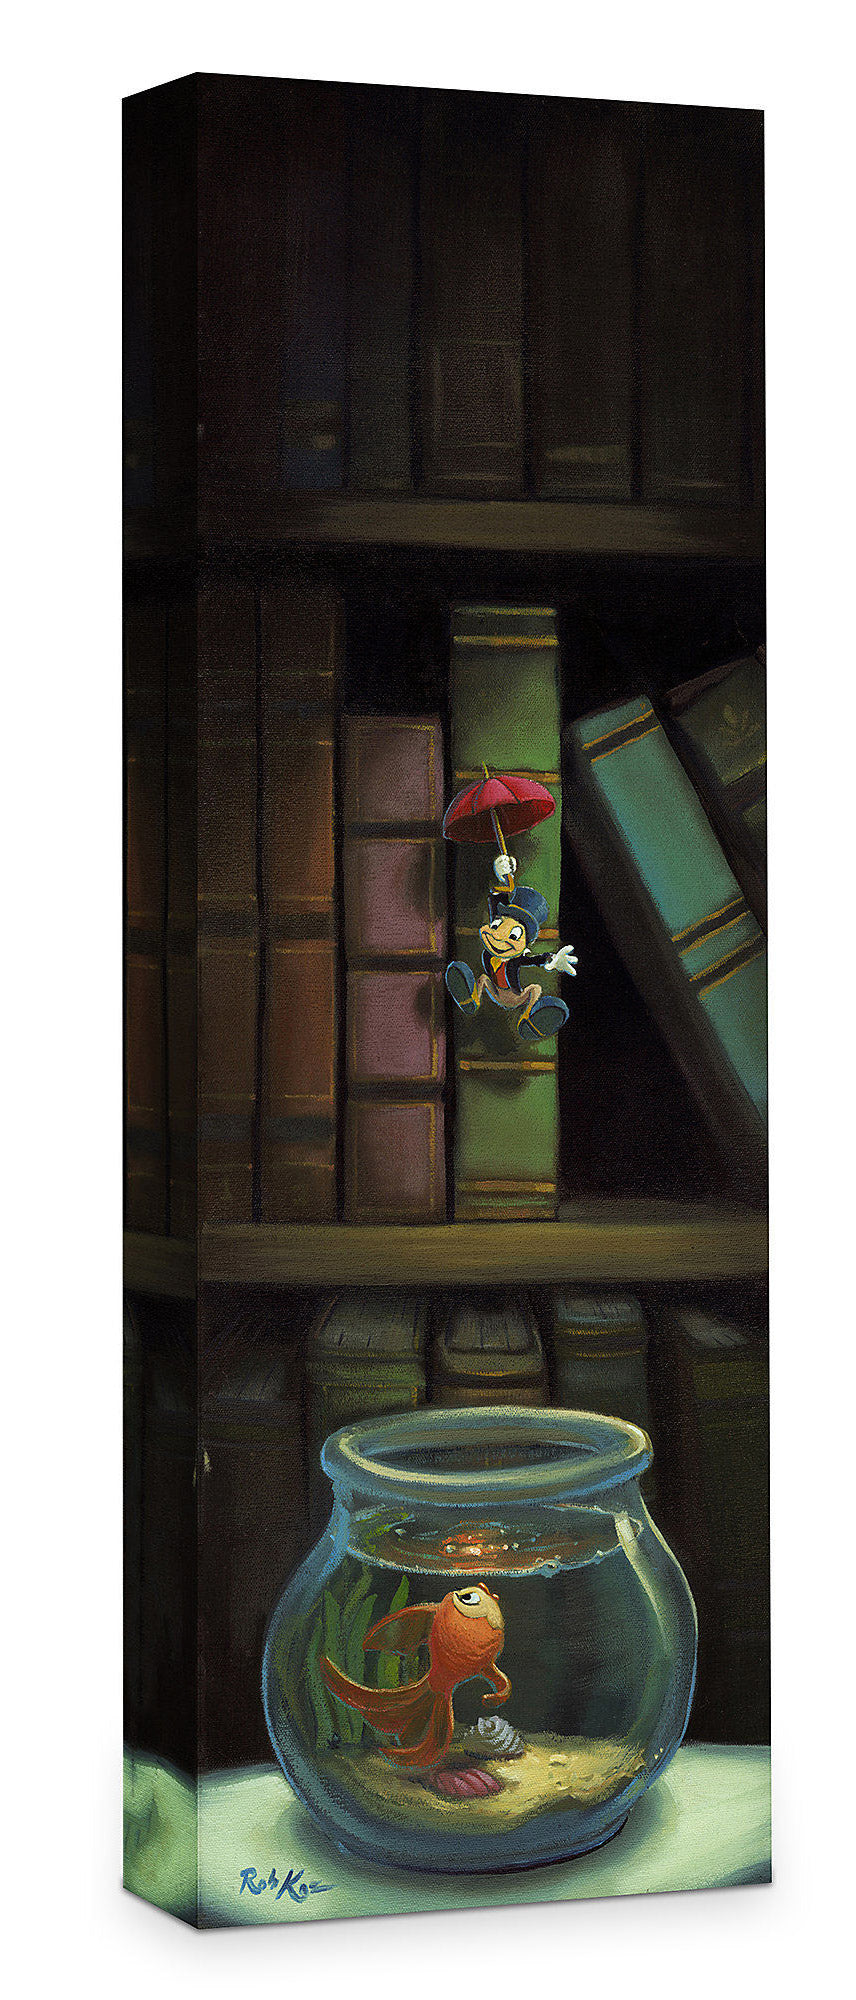 Rob Kaz Disney "Dropping In" Limited Edition Canvas Giclee